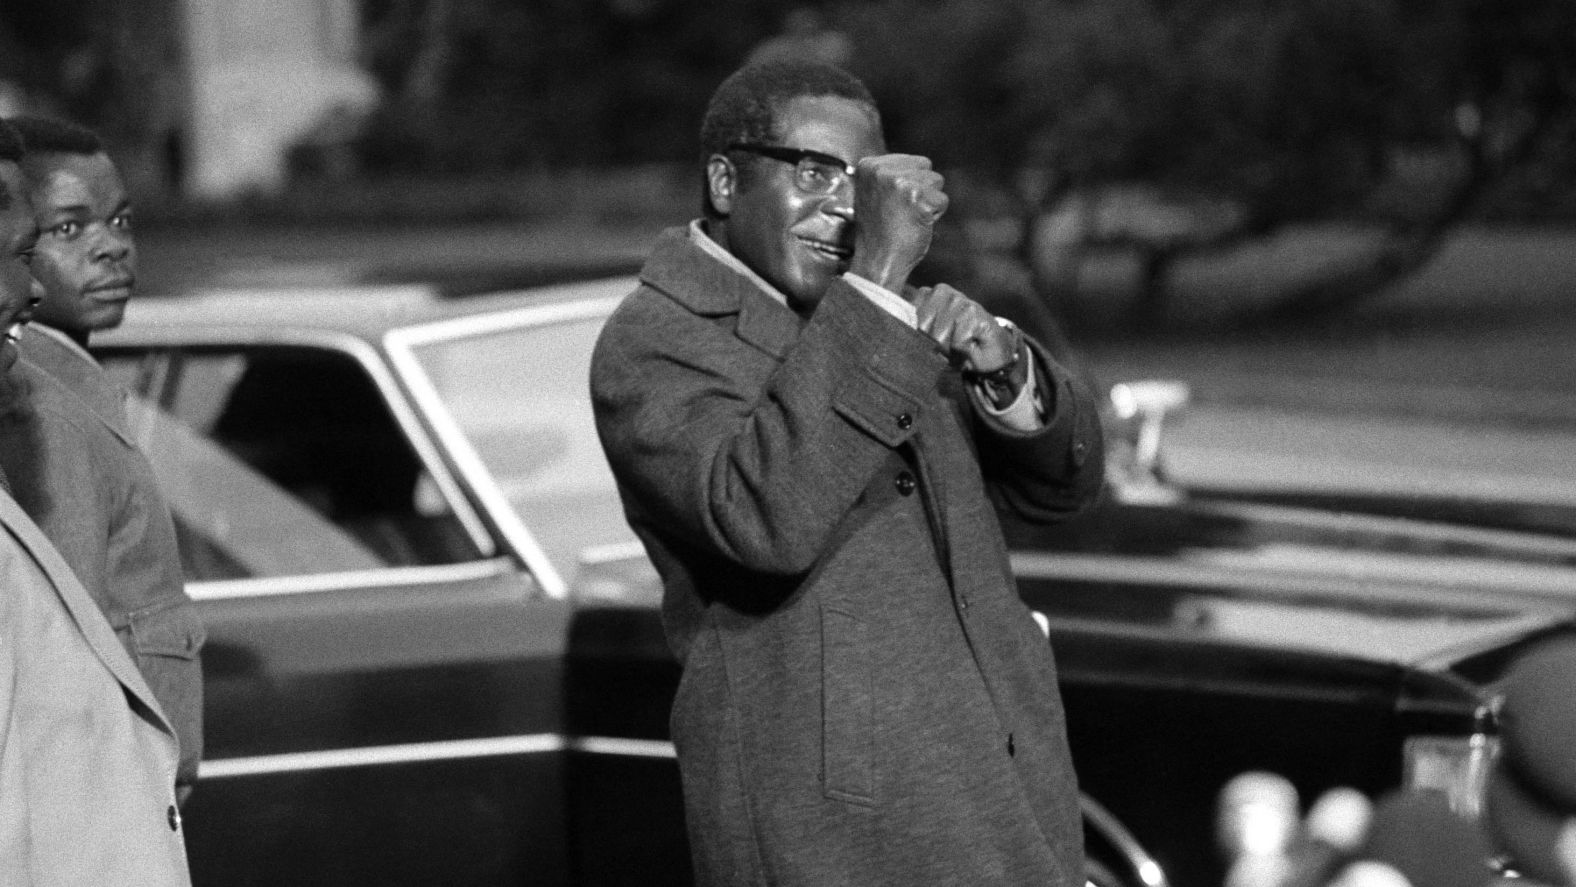 Mugabe gestures towards the media in Geneva, Switzerland, at a 1974 conference convened to address the civil war in Rhodesia. After being imprisoned for 10 years in Rhodesia, Mugabe attended the peace talks as a leader of the guerrilla movement ZANU-PF (Zimbabwe African National Union-Patriotic Front). Rhodesia was the state that eventually became Zimbabwe.